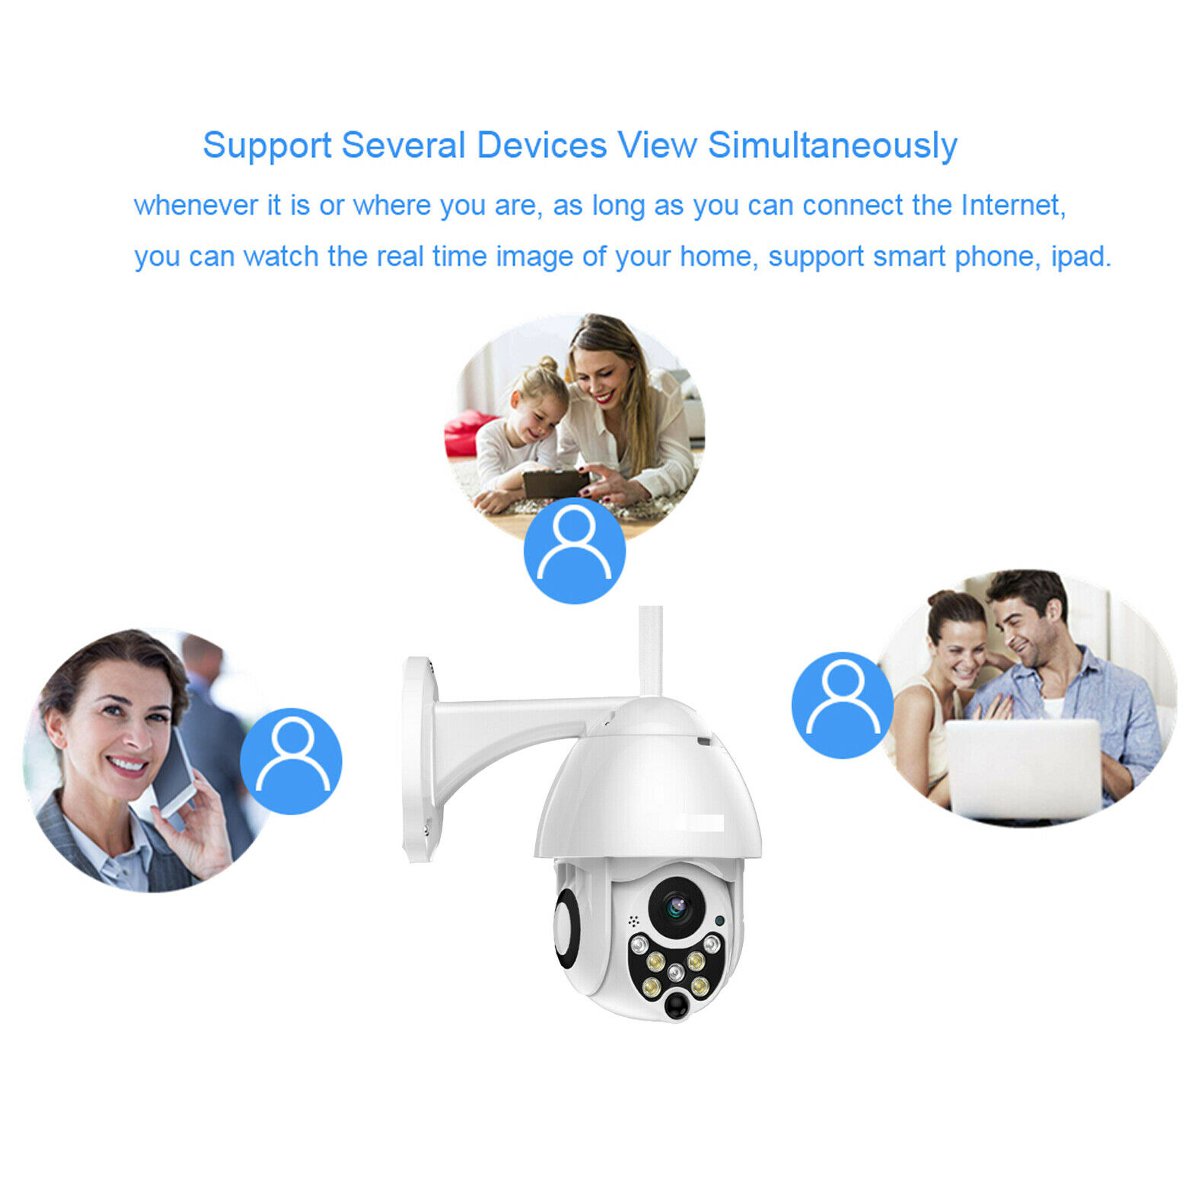 4X-ZOOM-1080P-FHD-360deg-PTZ-WIFI-IP-Camera-Infrared-Night-Vision-Motion-Detecting-Two-Way-Voice-1496890